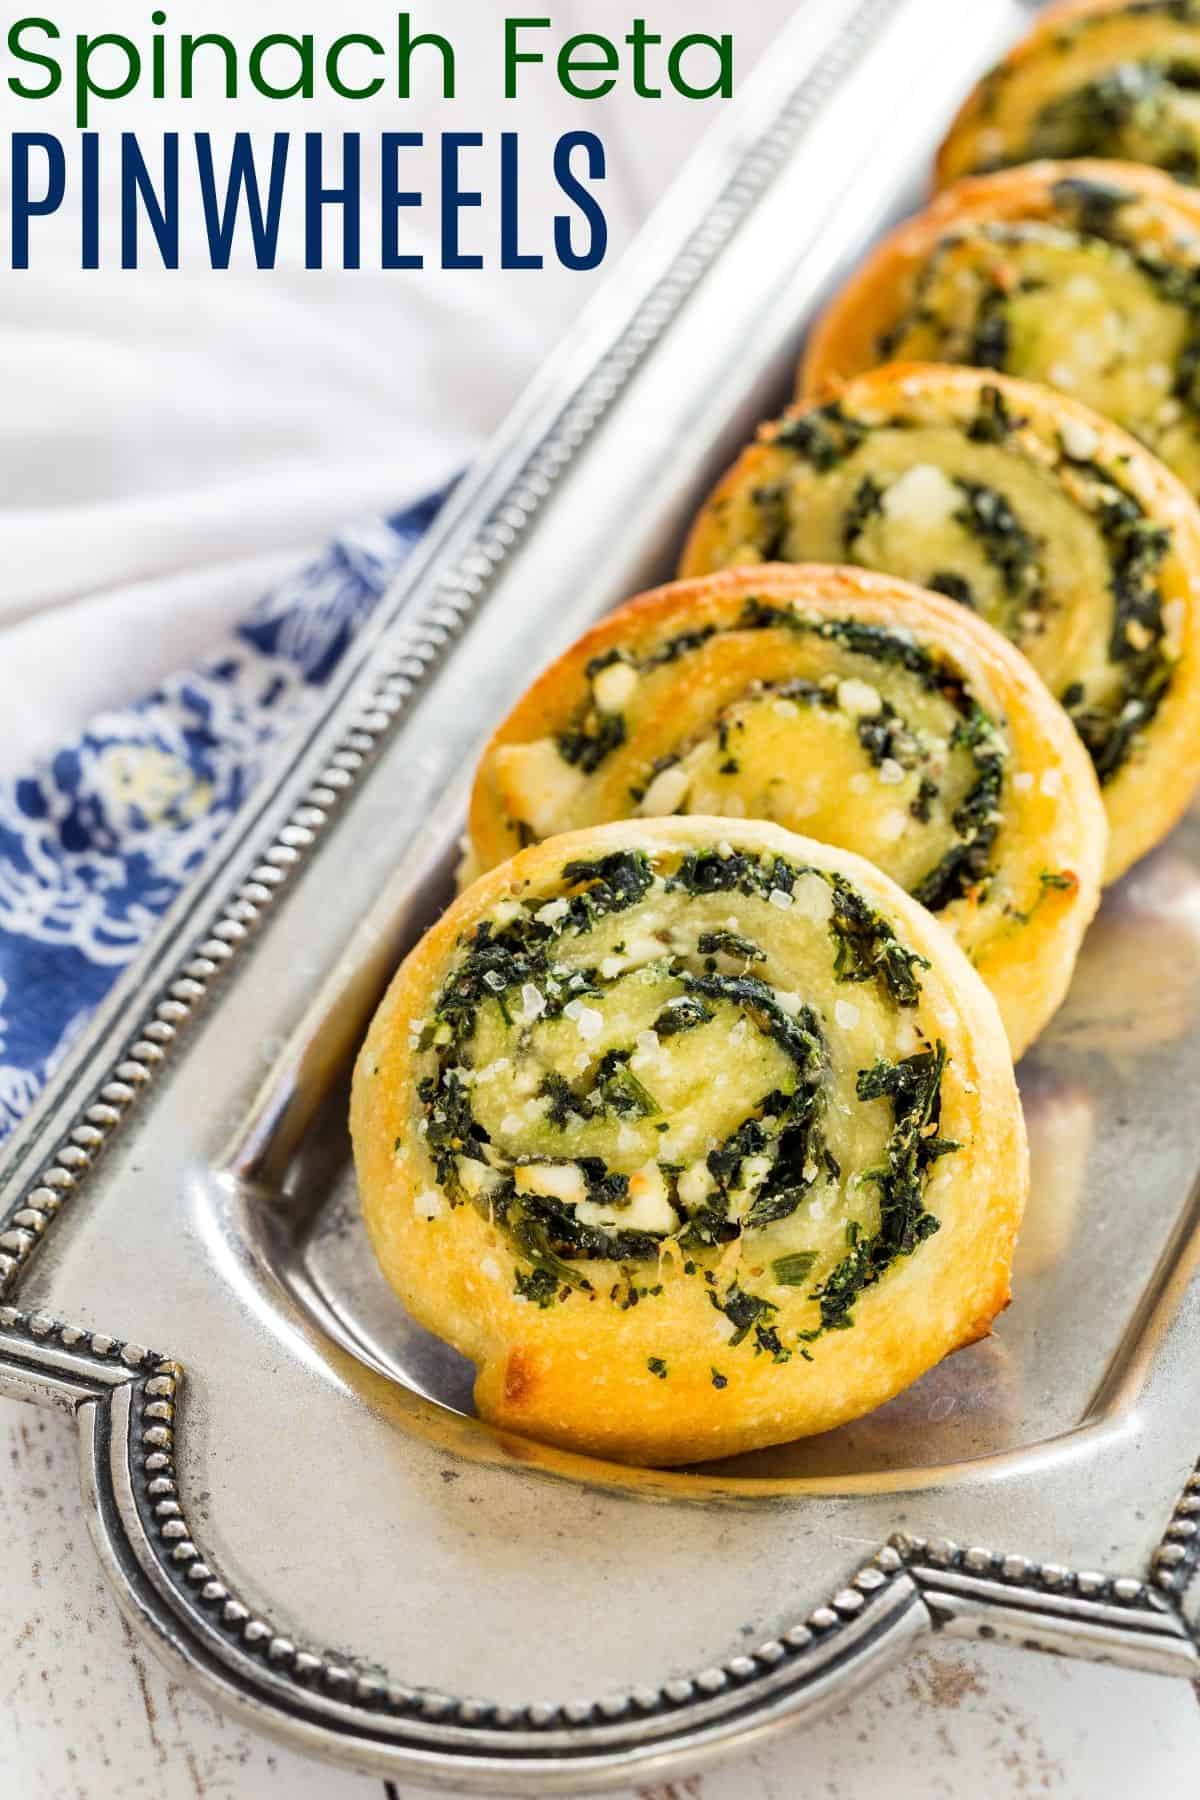 Low Carb Spinach Pinwheels Recipe Image with Title